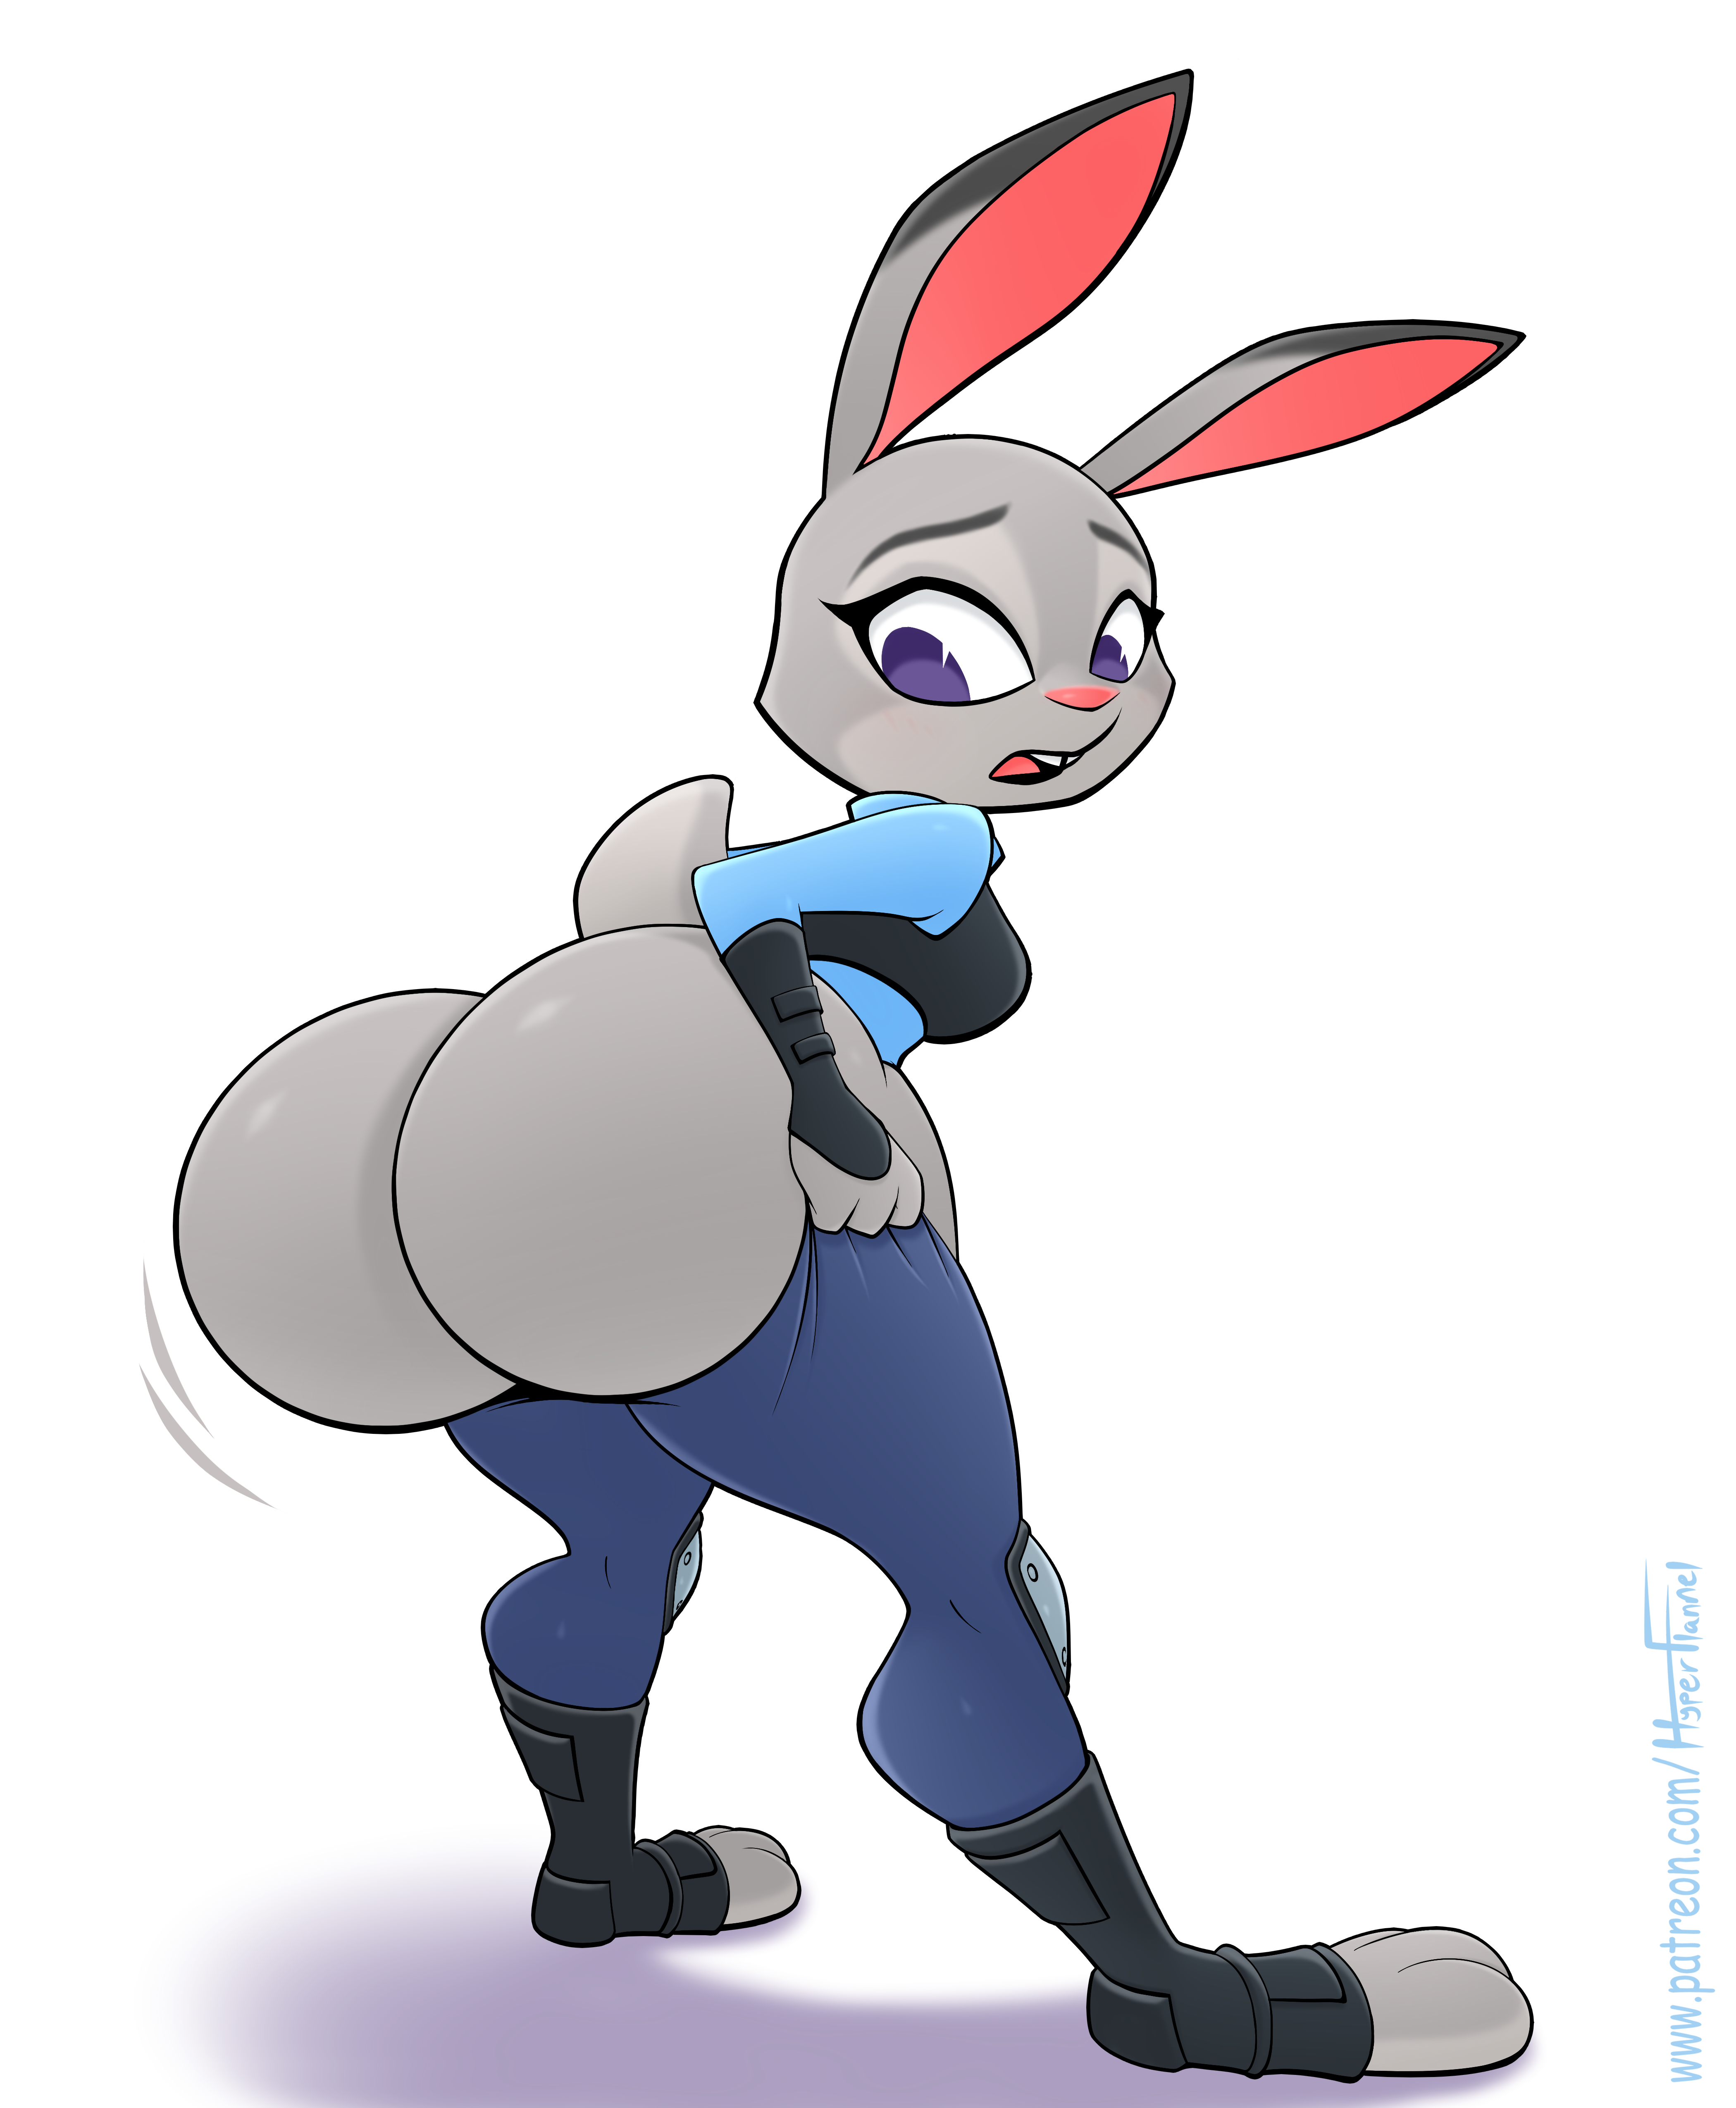 channing perry recommends judy hopps ass pic